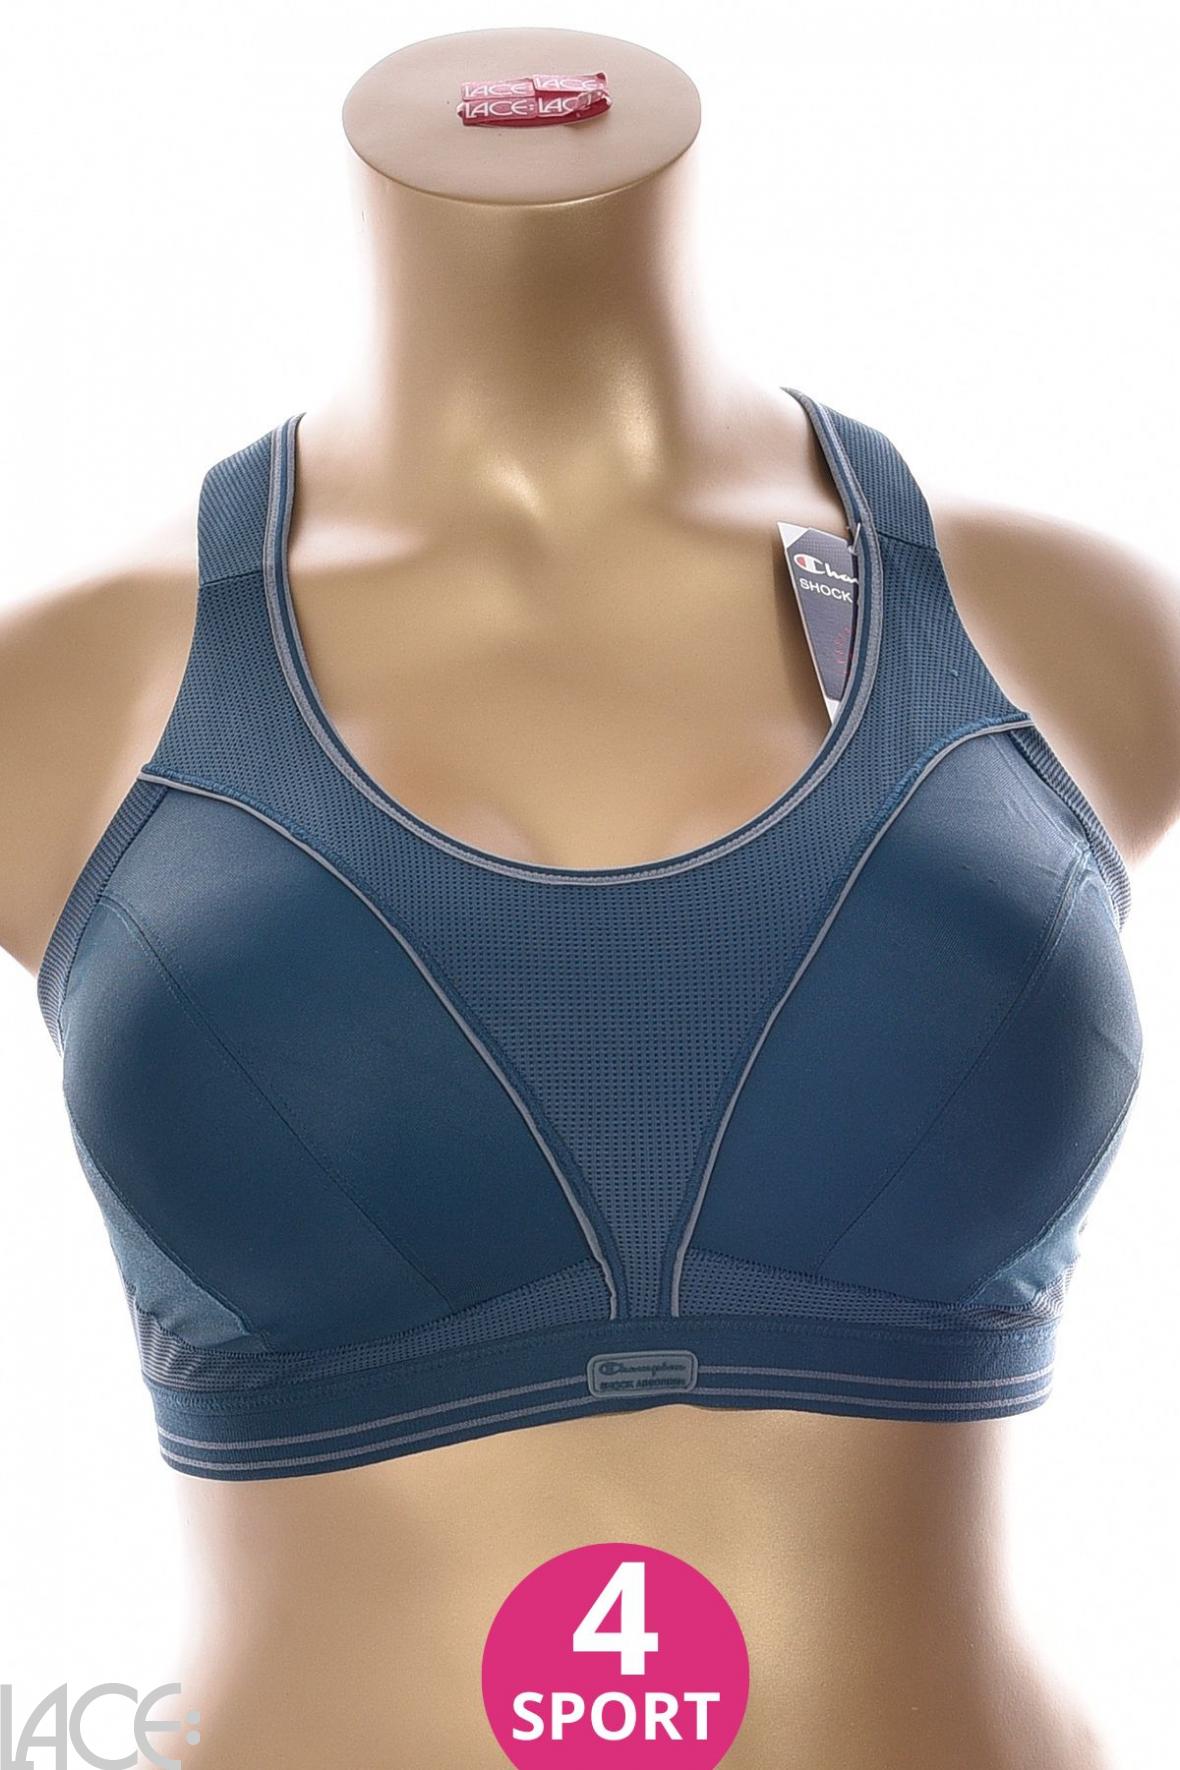 Shock Absorber Active Zipped Plunge Sports Bra B-F Cup